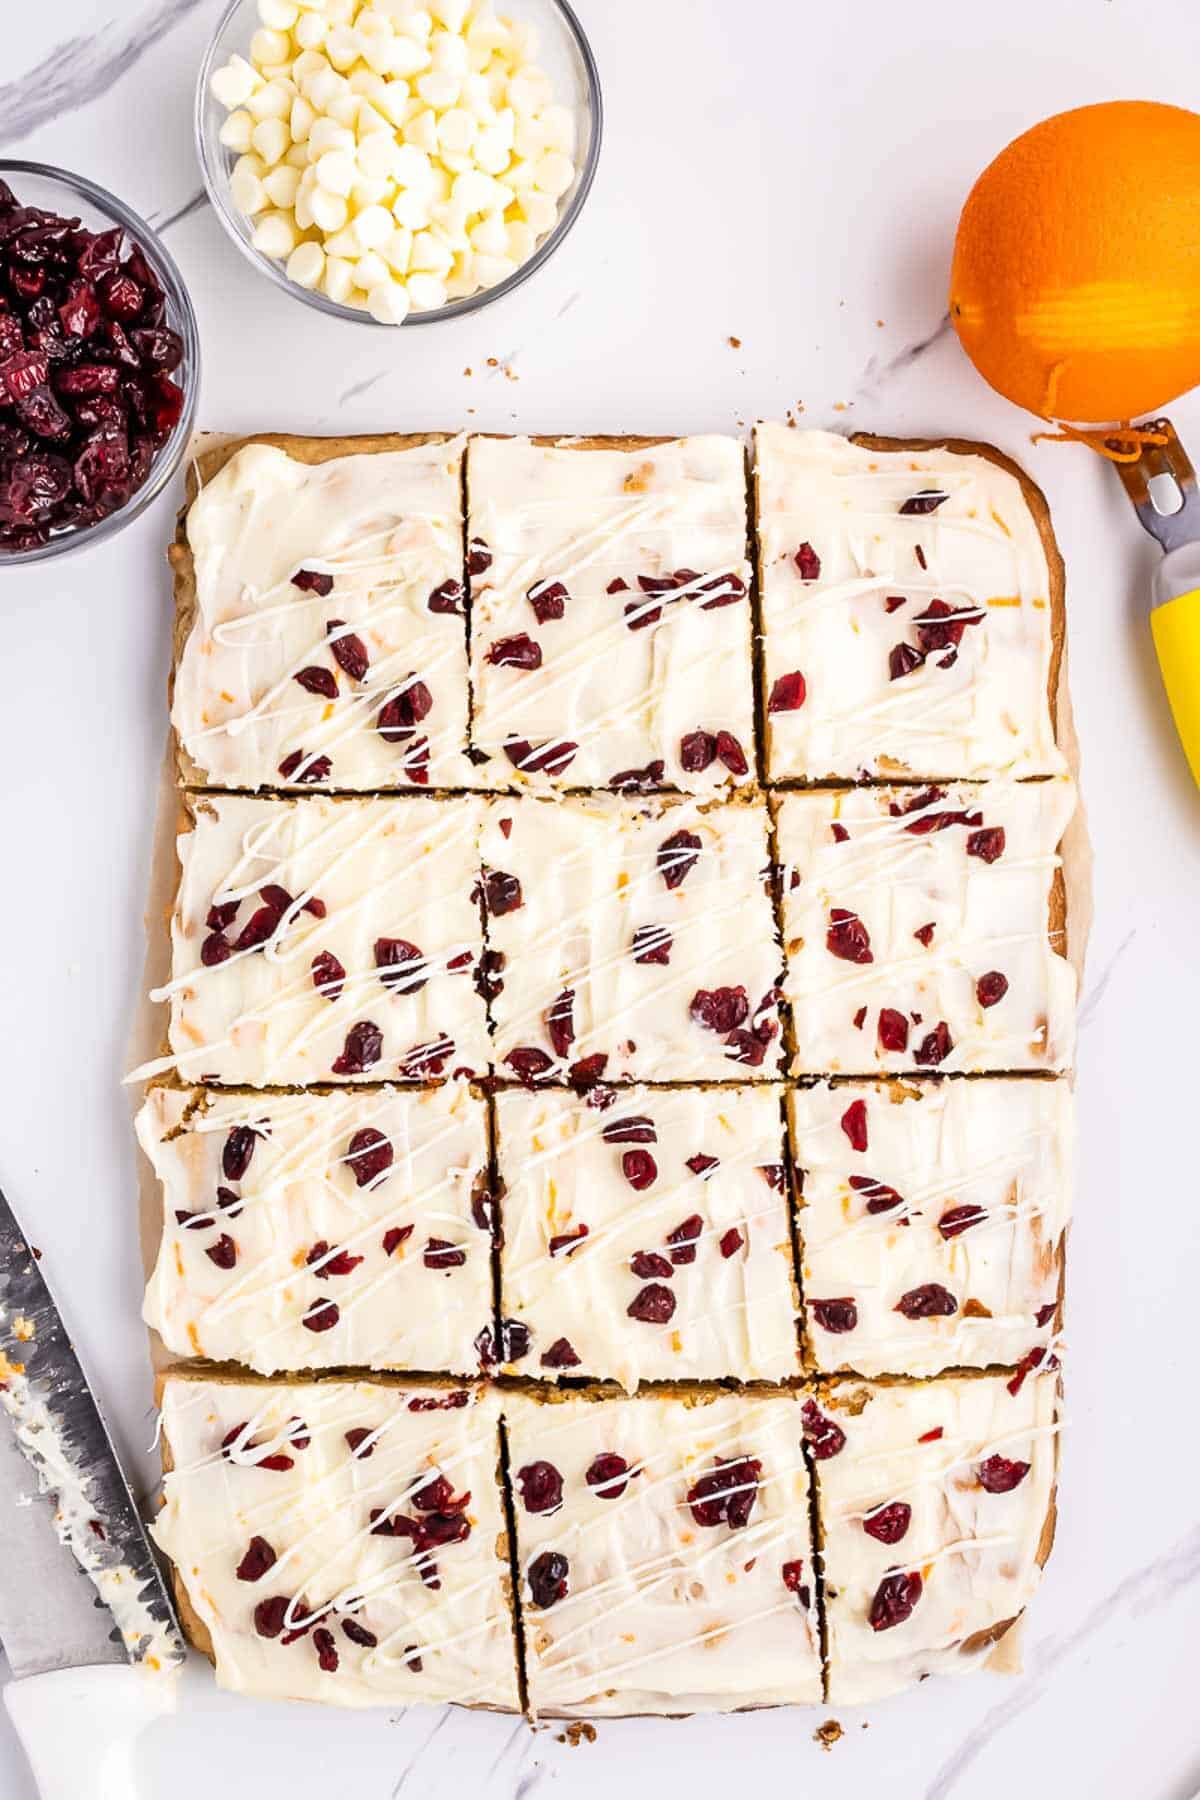 Cranberry bliss bars cut into 12 pieces.